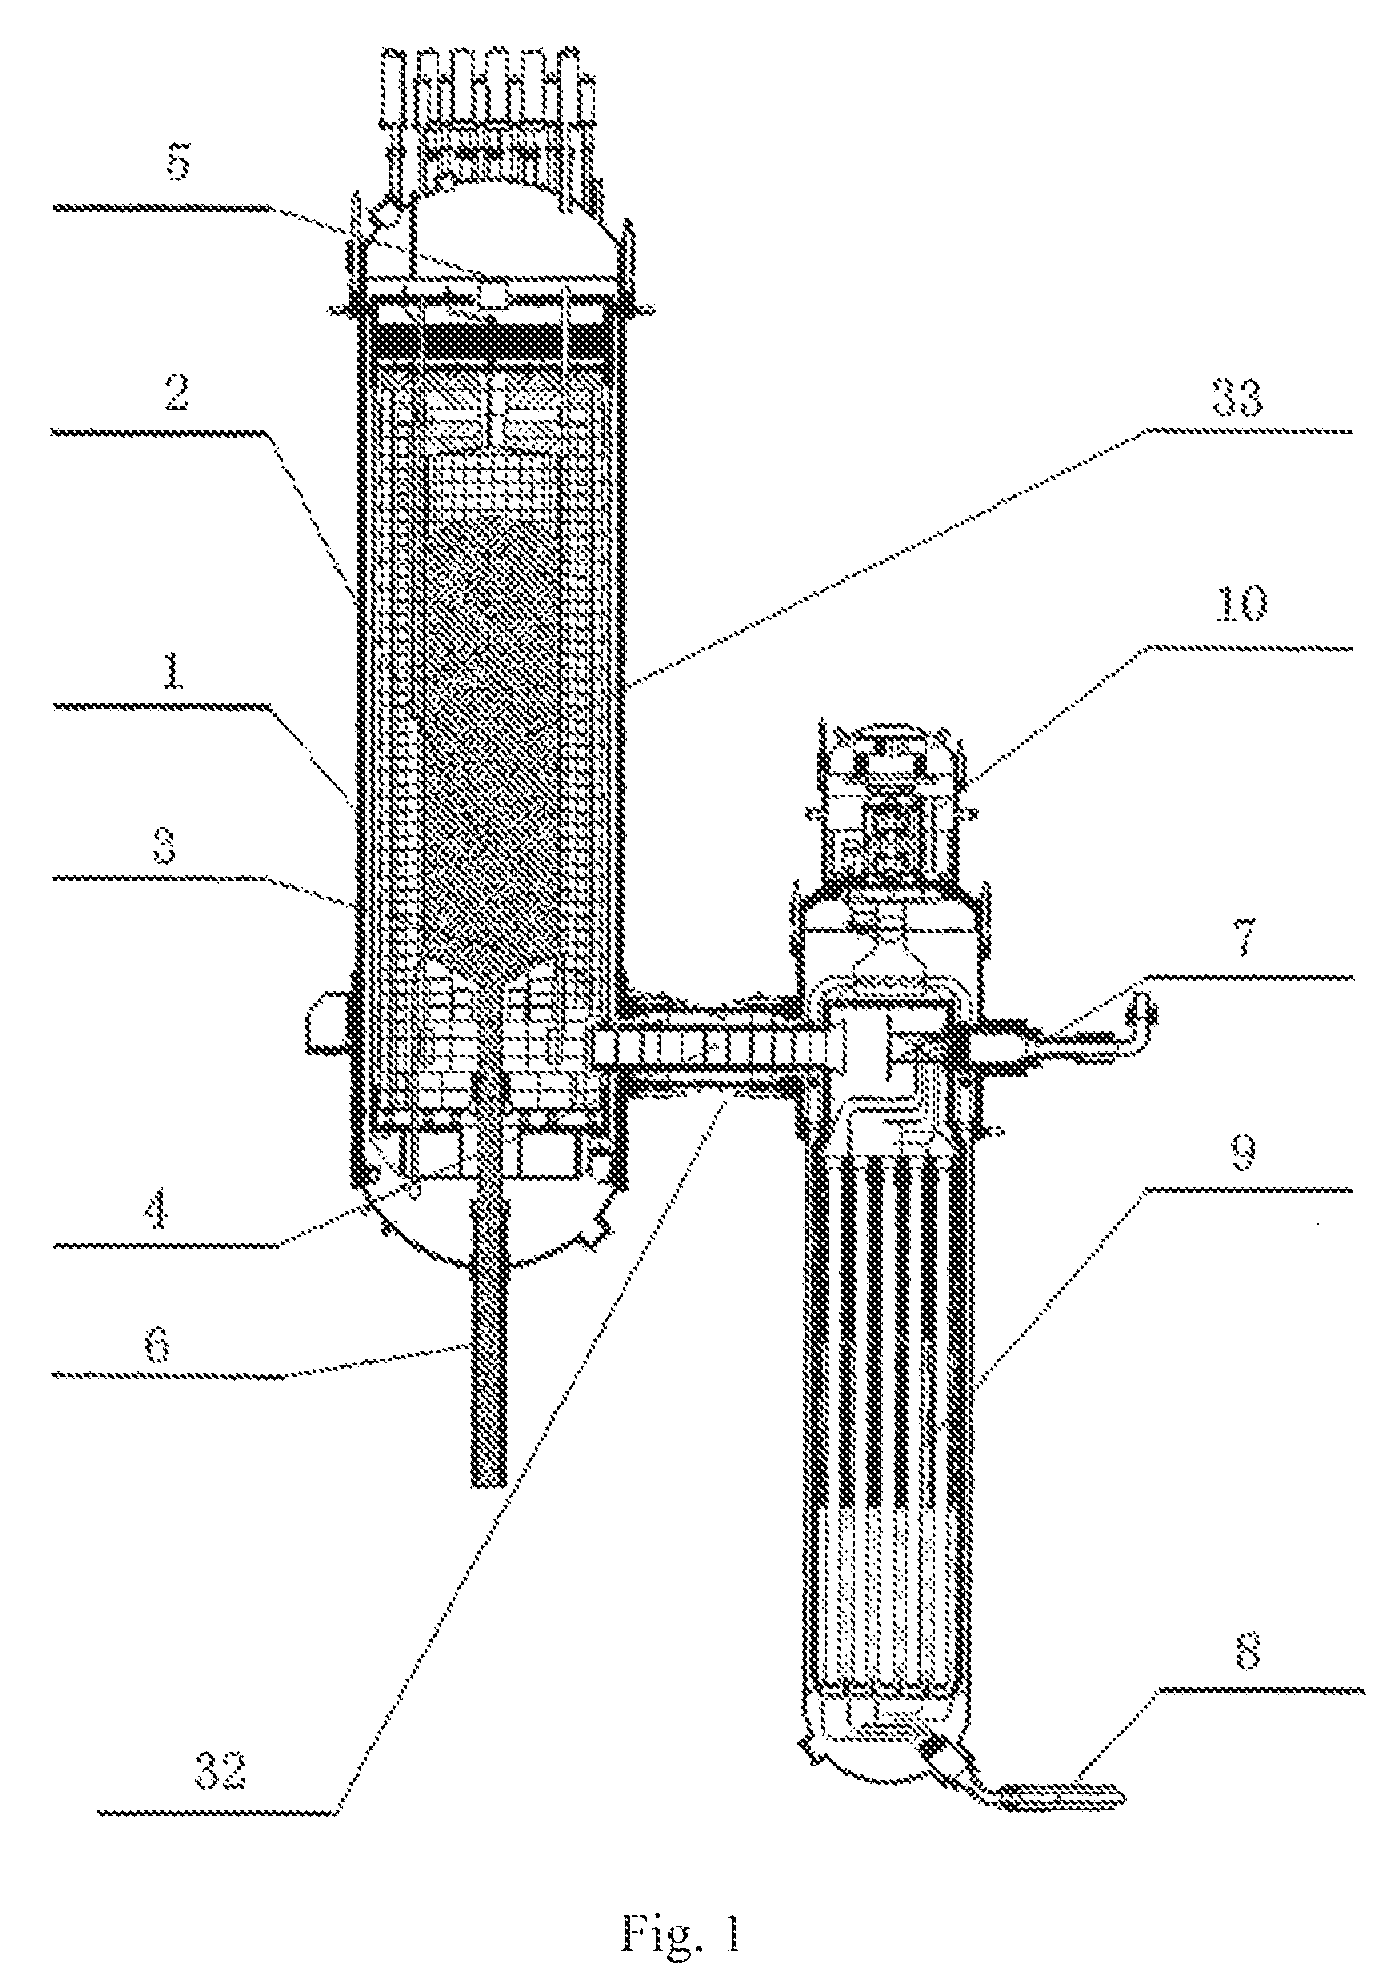 High-temperature gas-cooled reactor steam generating system and method